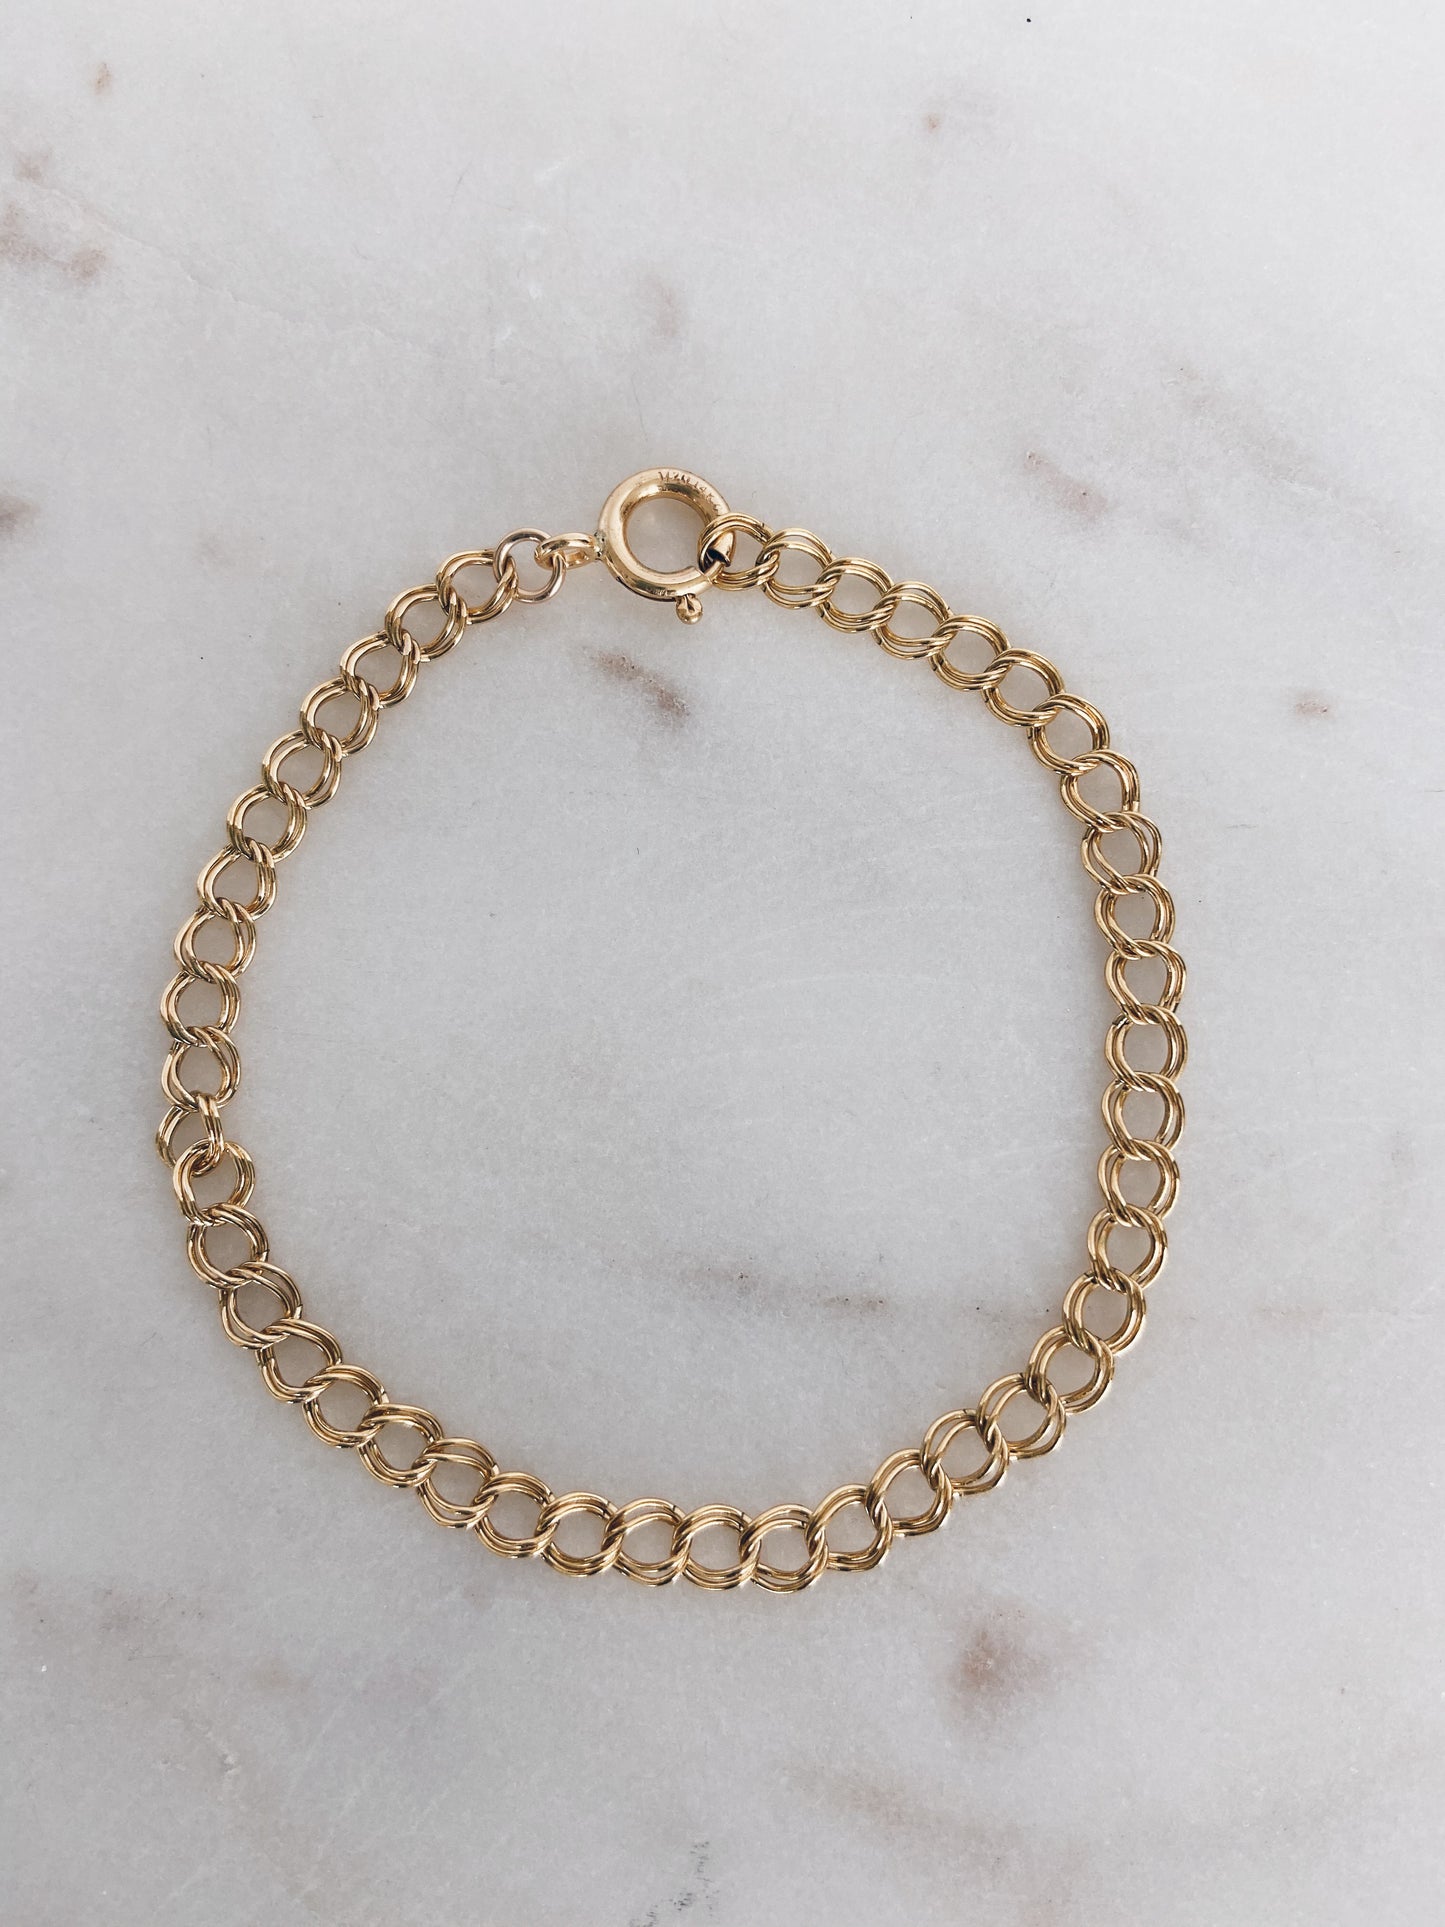 14k Gold Filled Double Curb Chain Bracelet